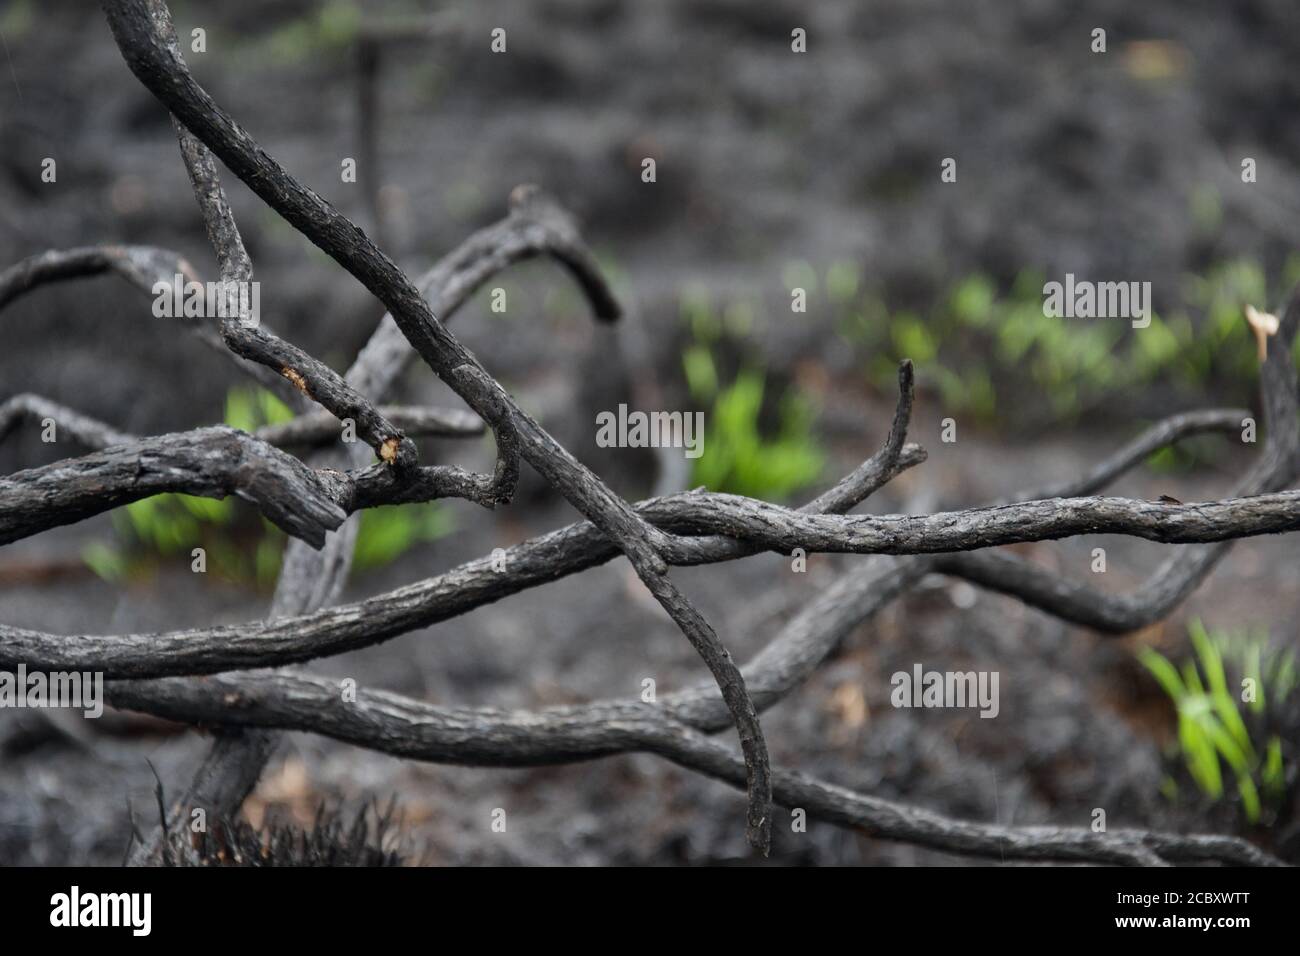 Tangled ashen branches, where once were bushes, with ashy ground in the background after a wild forest fire. Fresh green grass shoots are visible in t Stock Photo